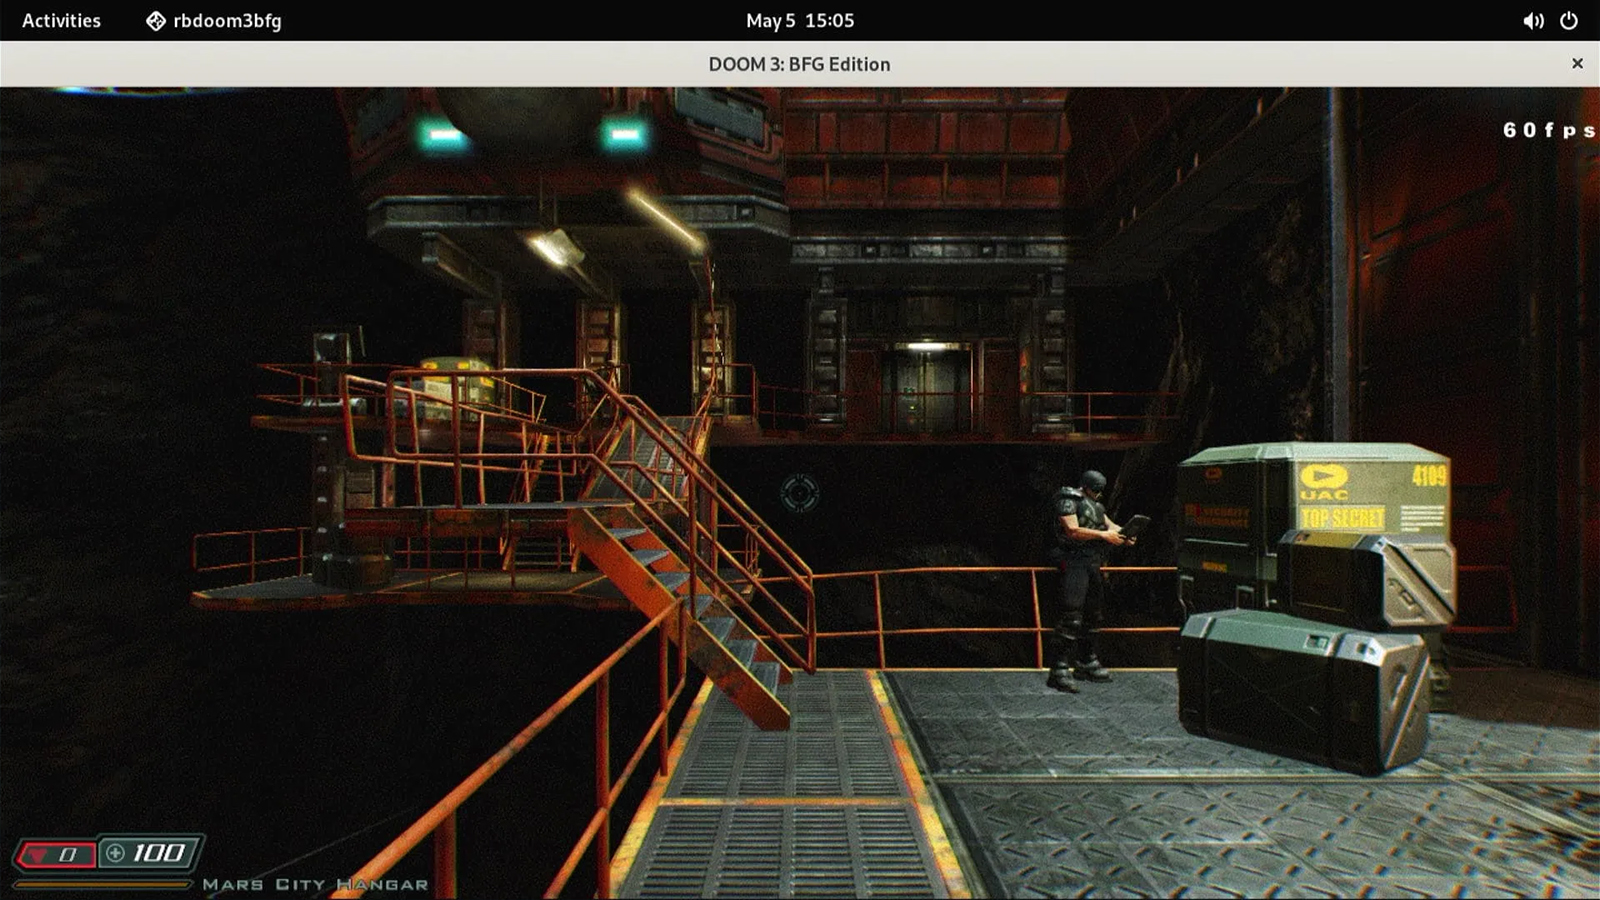 Doom 3: BFG running on Intel Arc A750, Ampere Altra ARM CPU, and Linux OS